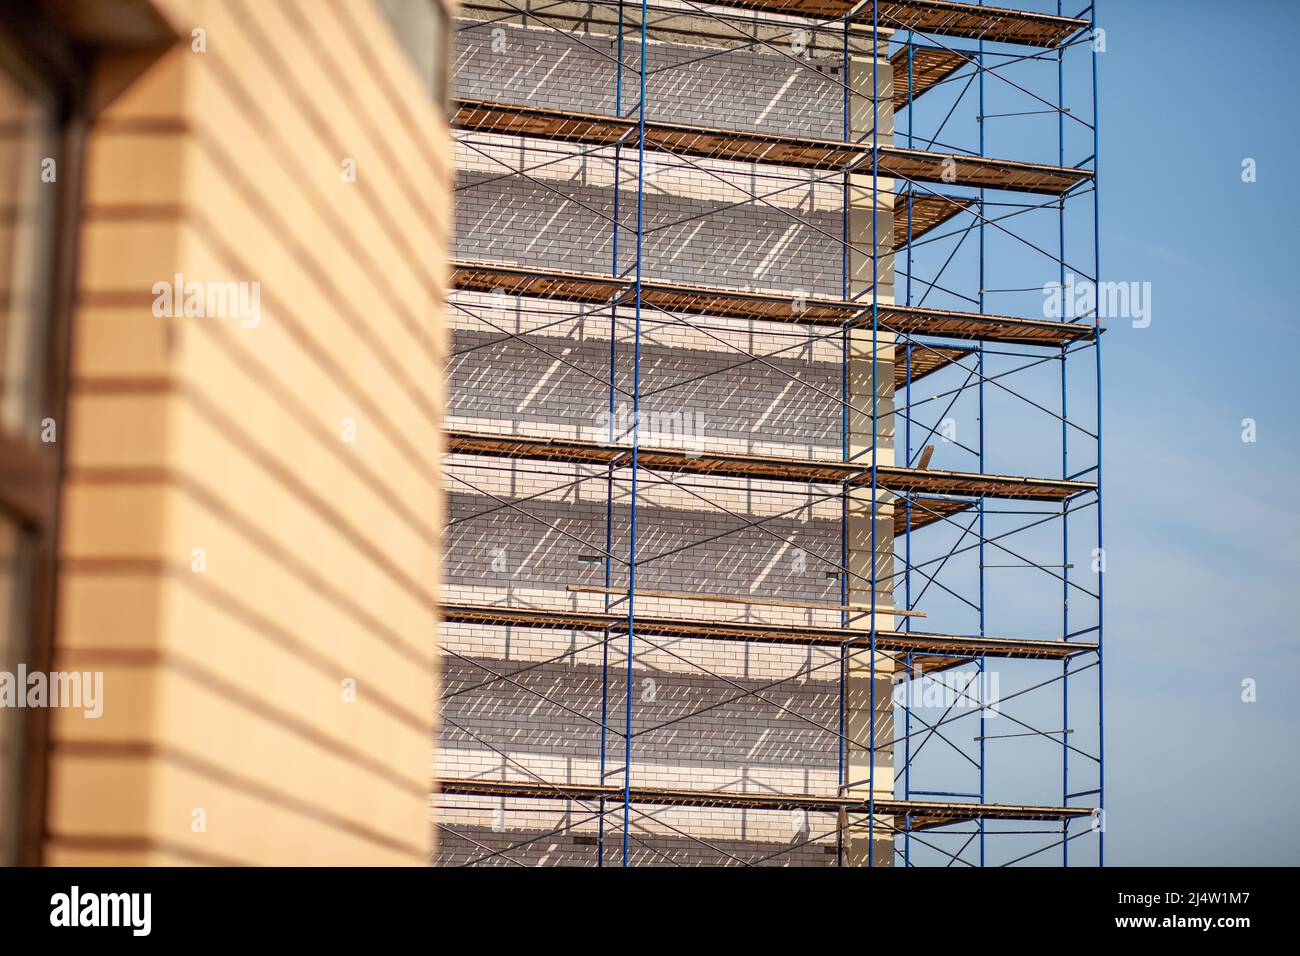 Scaffolding, metal mobile scaffold aginst blue sky background. Modern building is under construction, metal scaffolding. Stock Photo